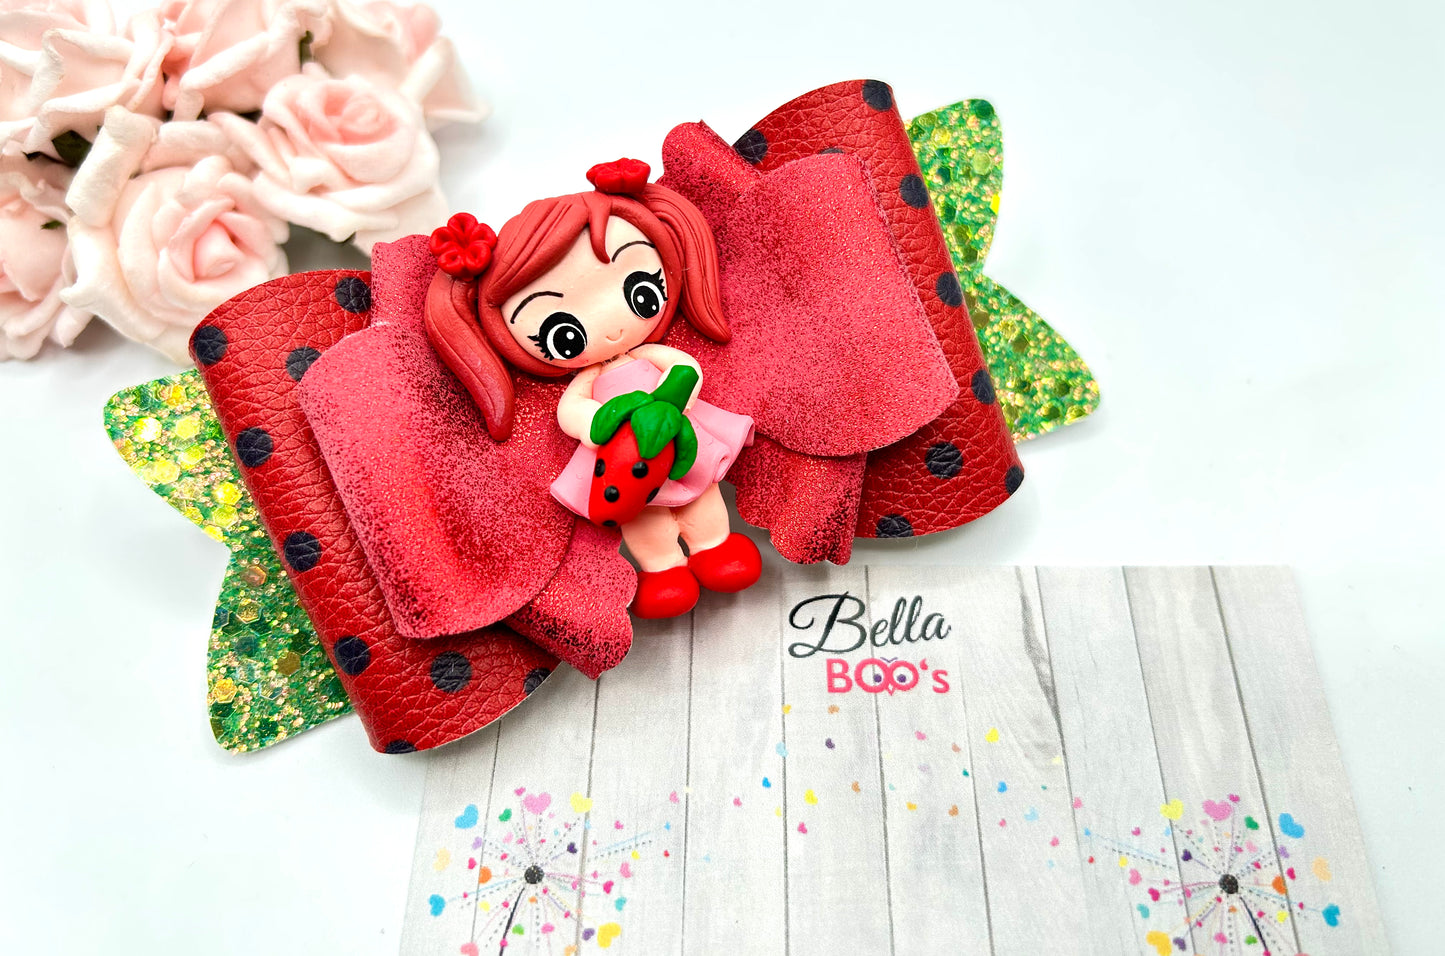 Load image into Gallery viewer, Strawberry Girl Delight Hair Bow - Handcrafted Clay
